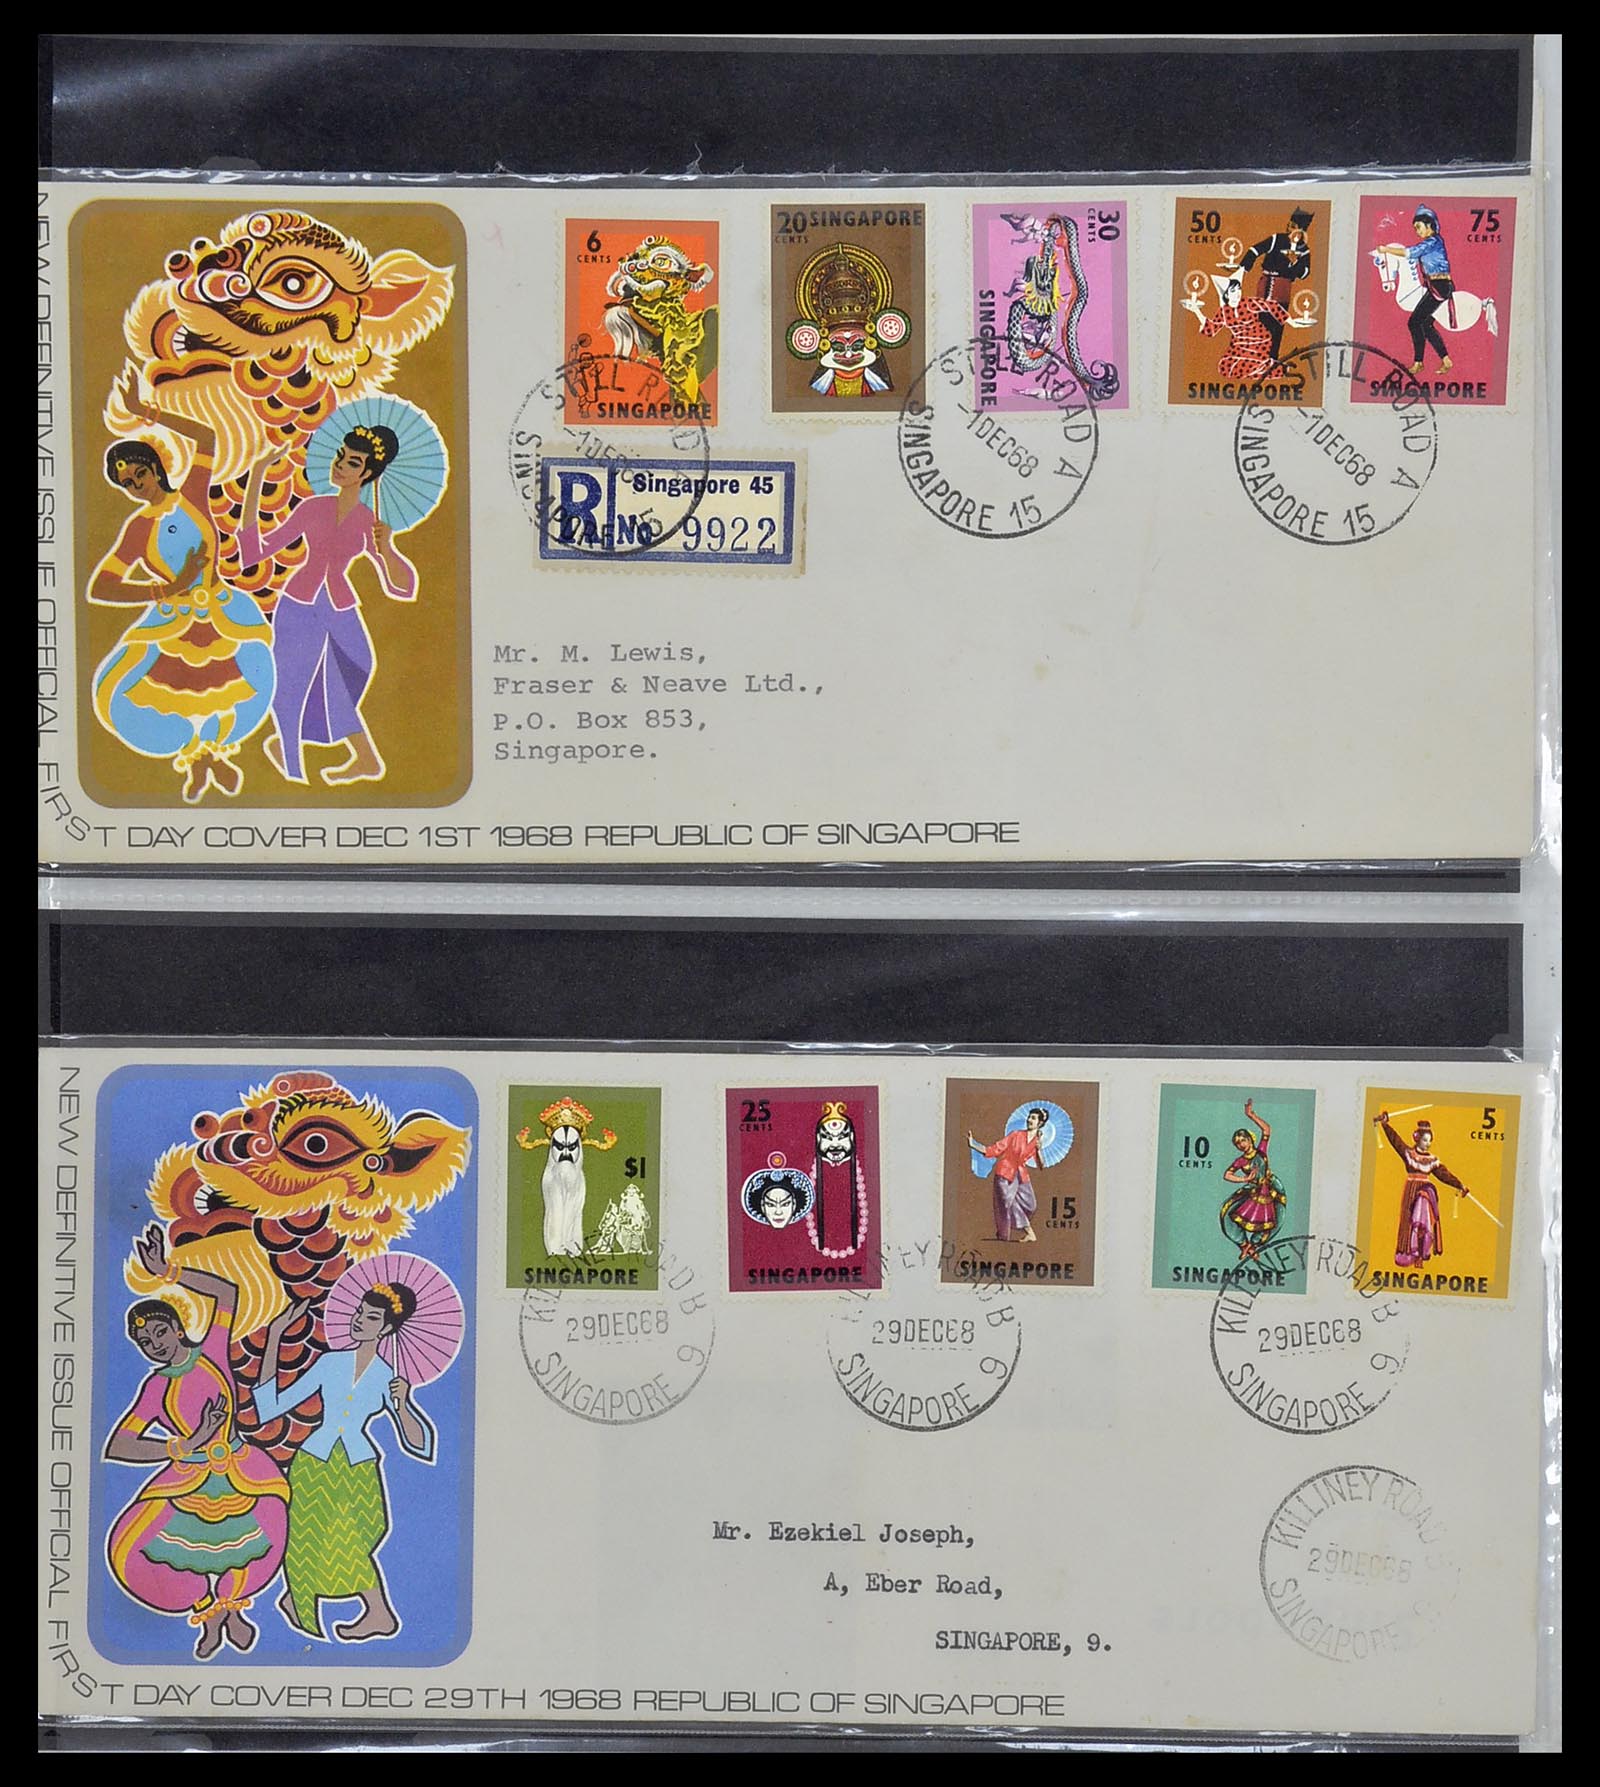 34394 015 - Stamp collection 34394 Singapore FDC's 1948-2015!